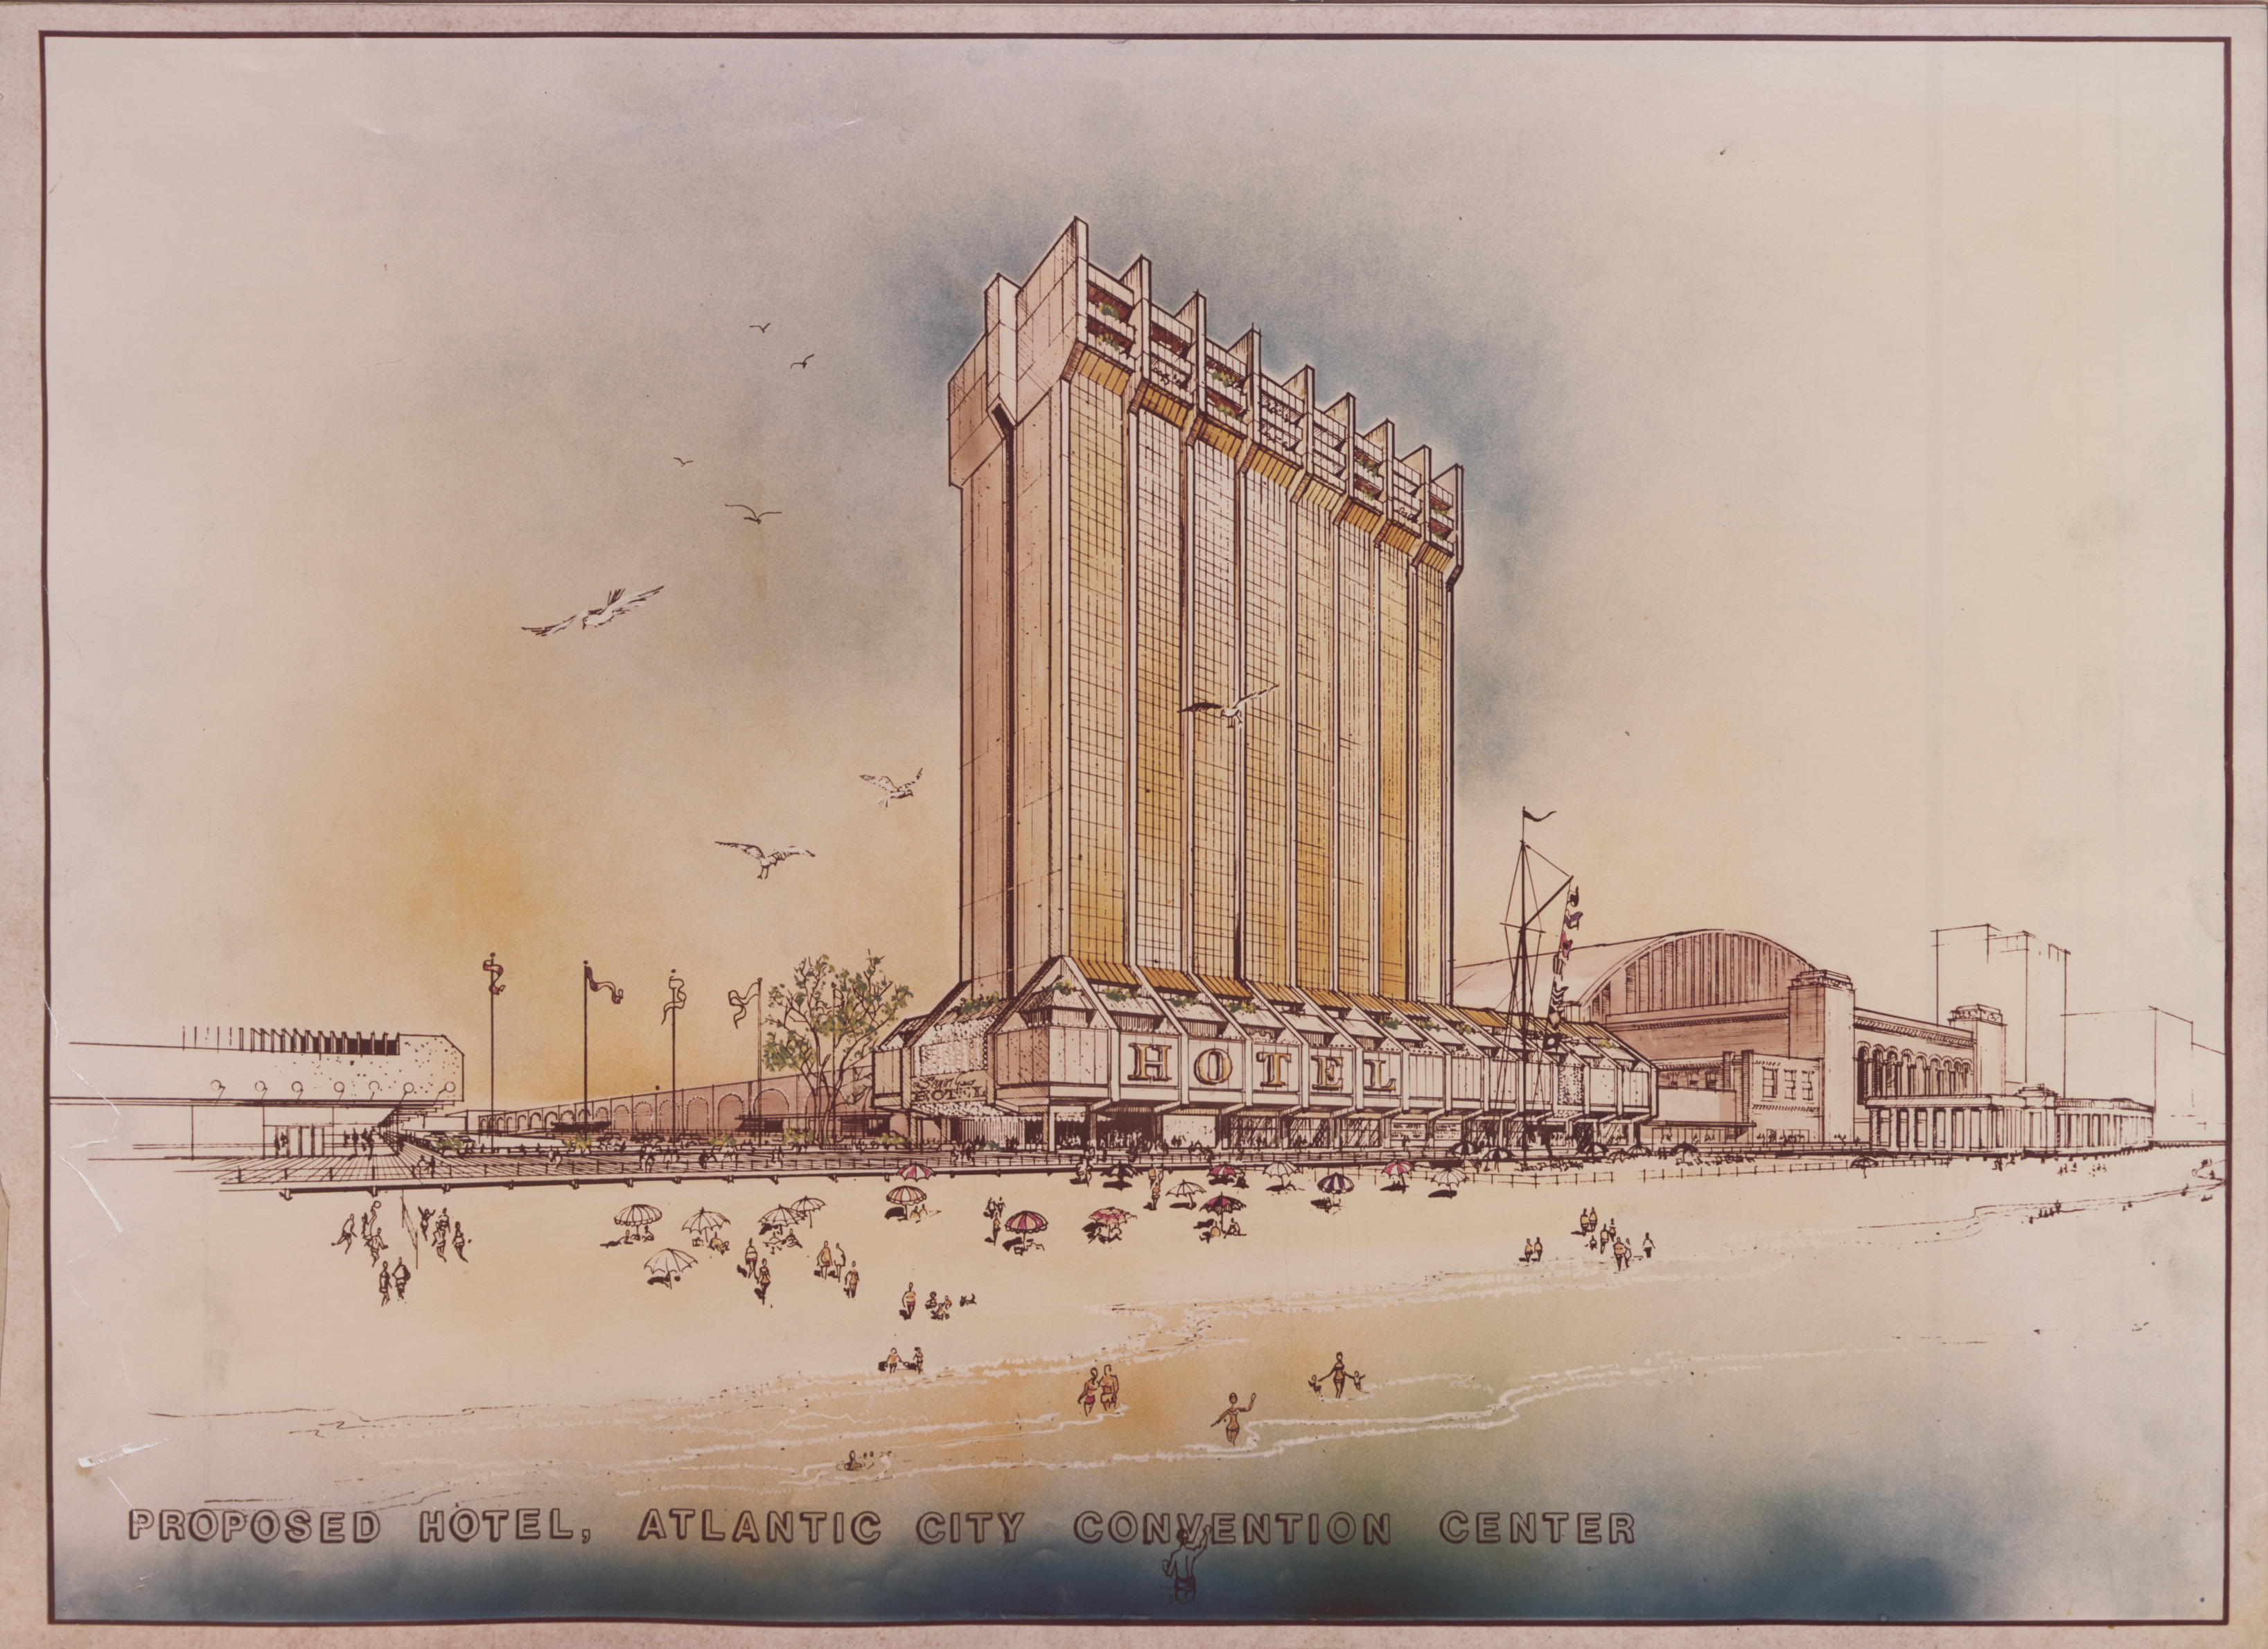 Proposed Hotel, Atlantic City Convention Center, image 1